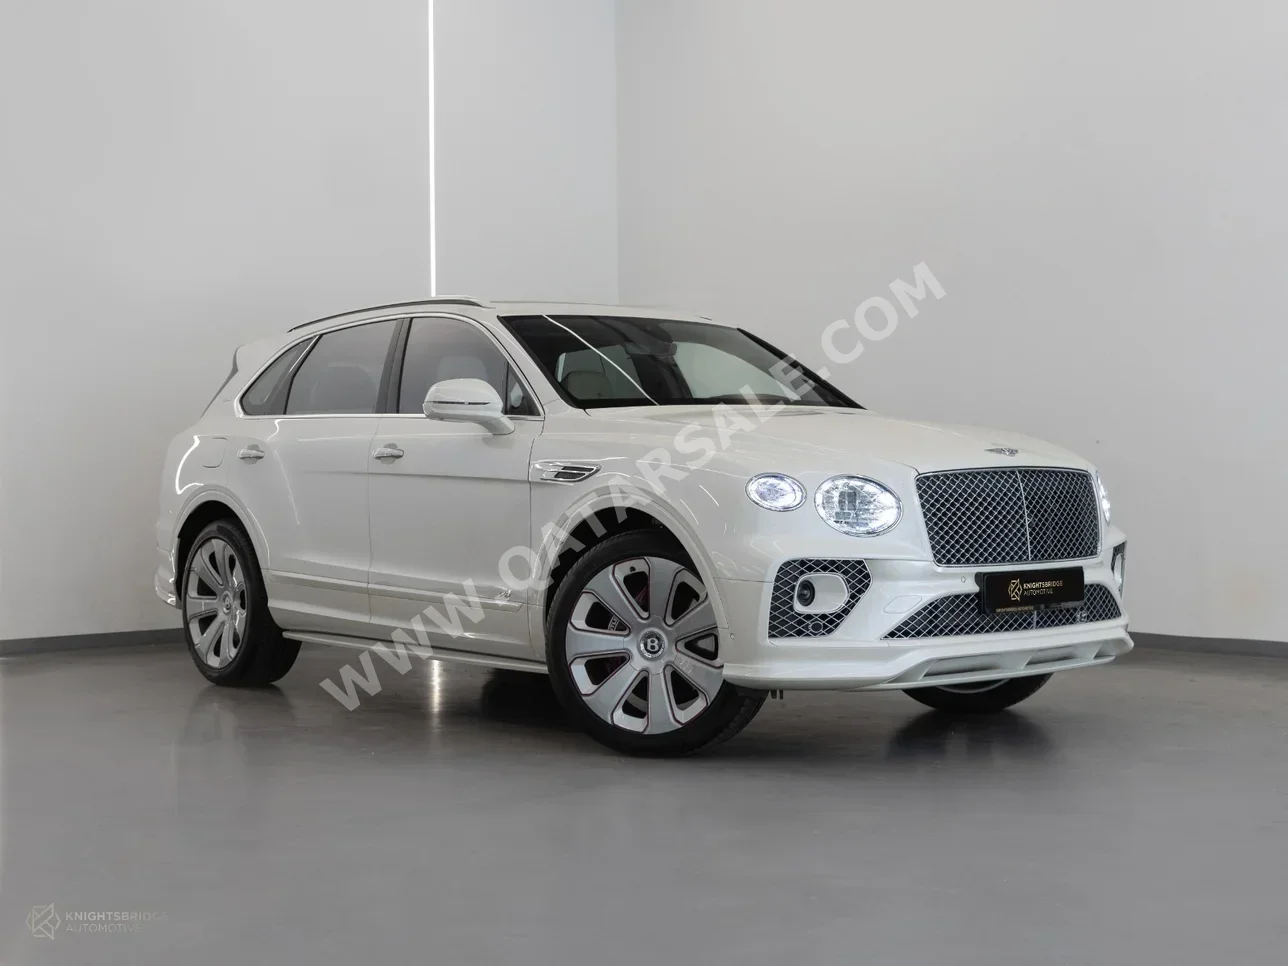 Bentley  Bentayga  Mulliner  2023  Automatic  700 Km  8 Cylinder  All Wheel Drive (AWD)  SUV  White  With Warranty